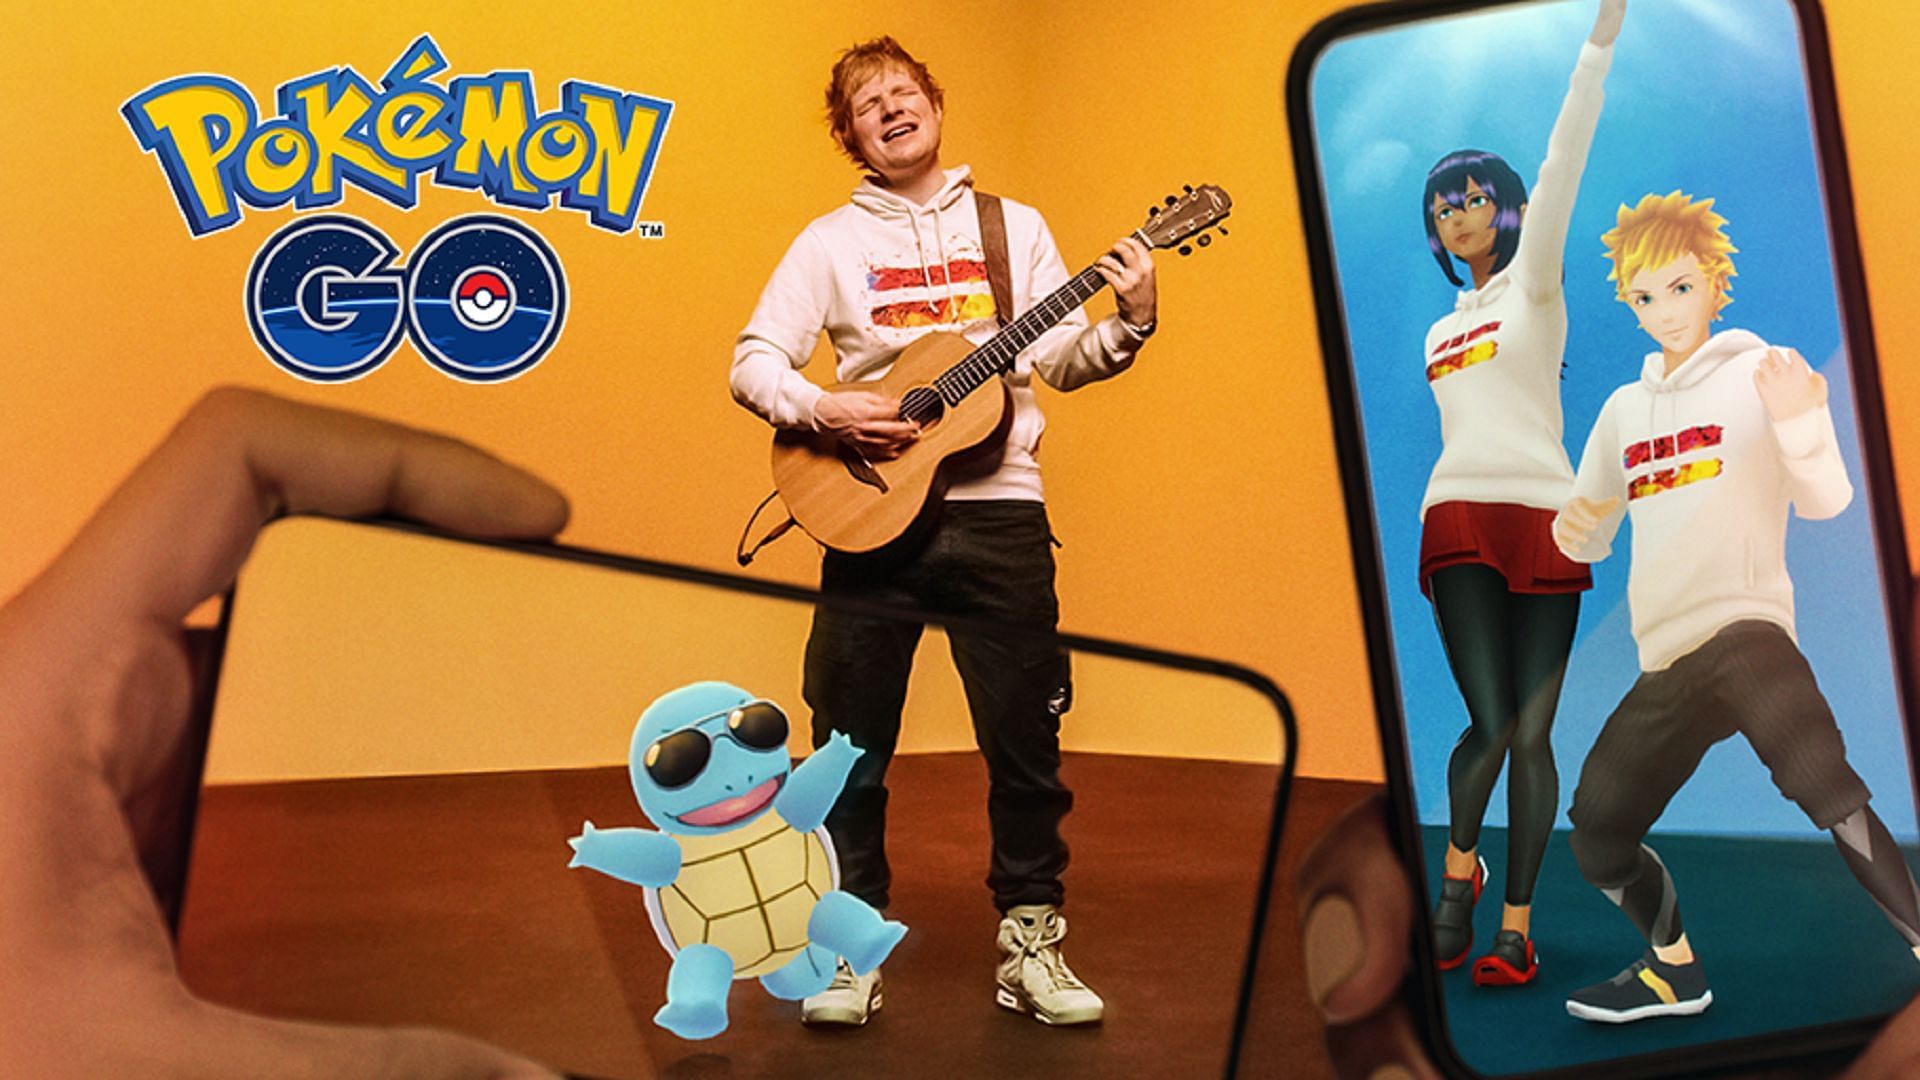 Sheeran previously performed a special concert in a Pokemon GO collaboration in late 2021 (Image via Niantic)